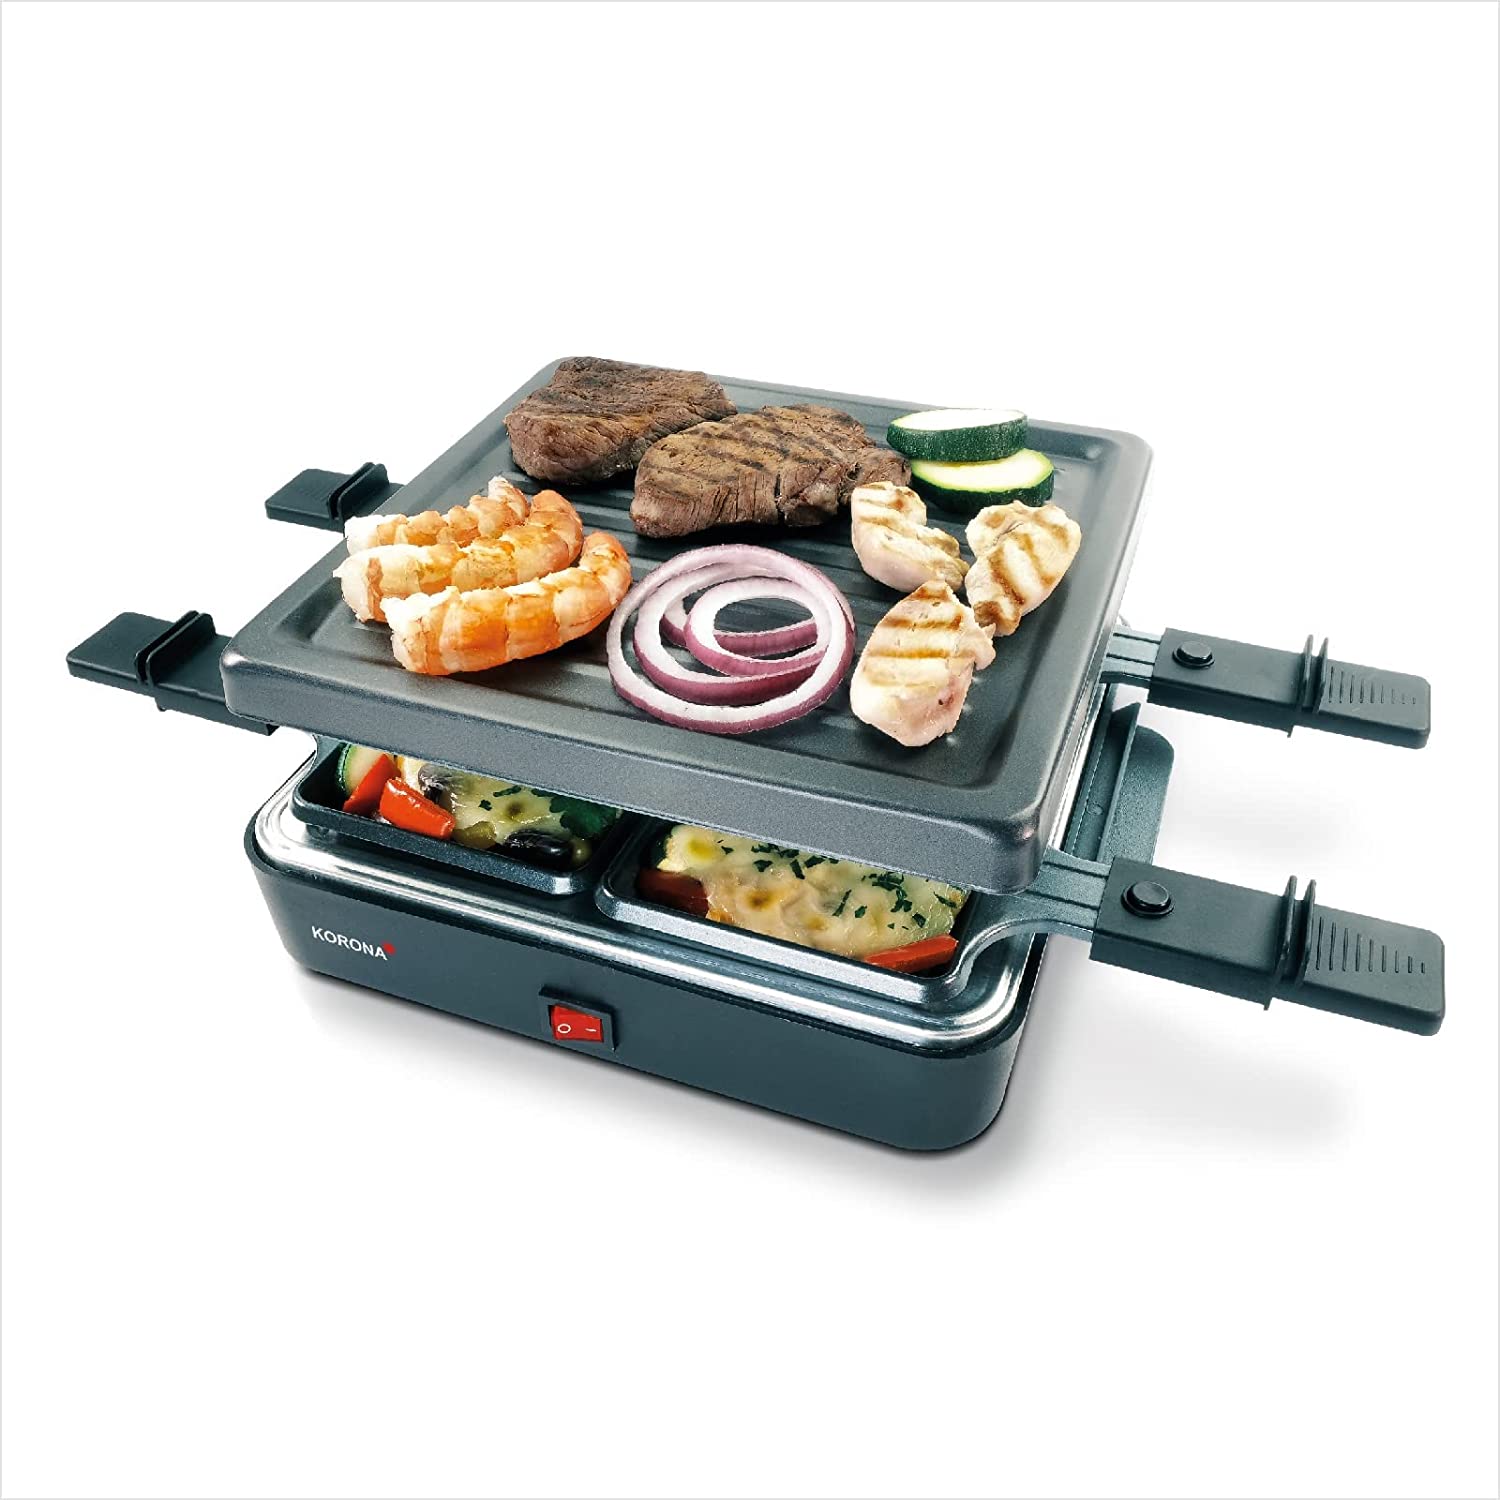 Korona 45081 Raclette for 4 People, Square Raclette with 4 Pans and Spatulas, with Non-Stick Grill Plate, 600 Watt